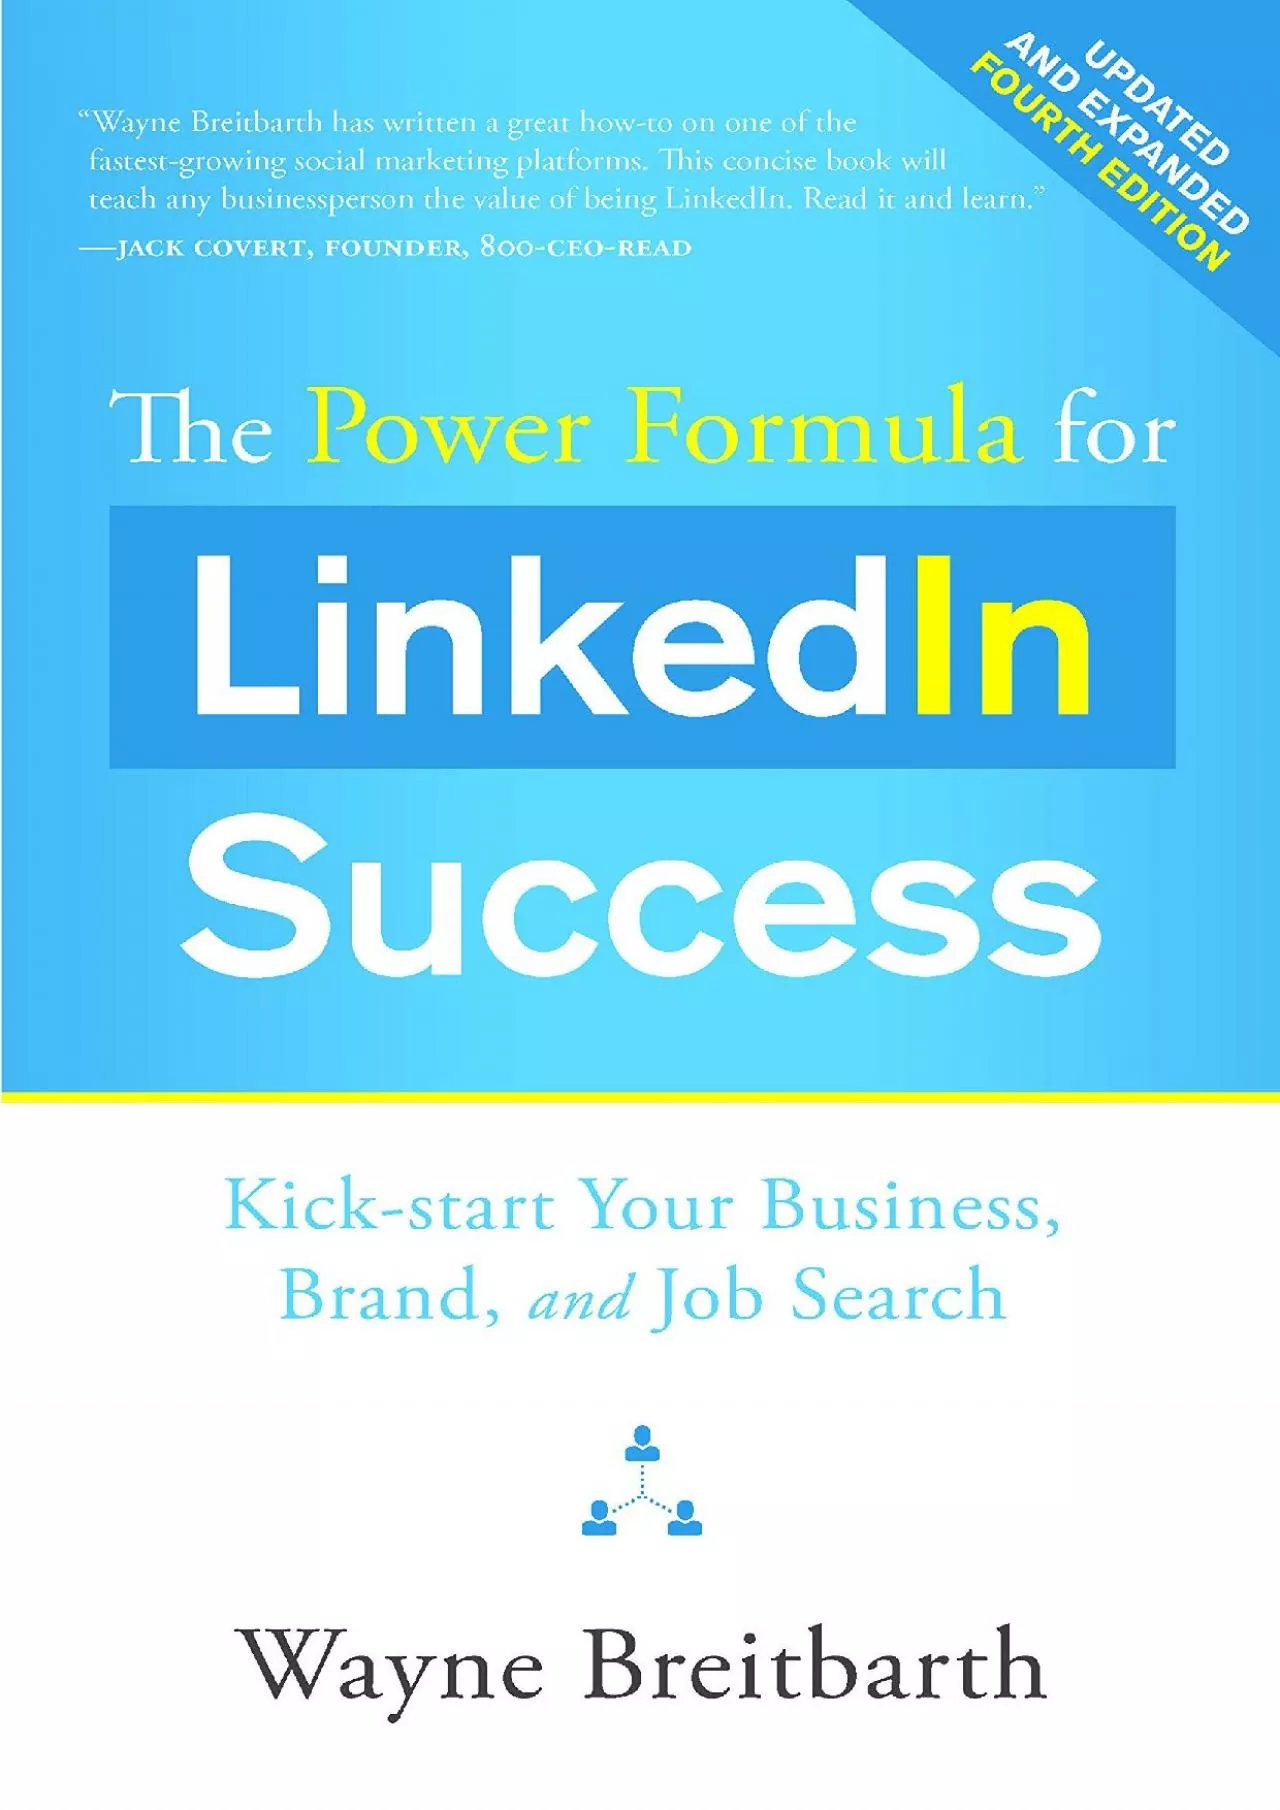 The Power Formula for LinkedIn Success (Fourth Edition - Completely Revised): Kick-start